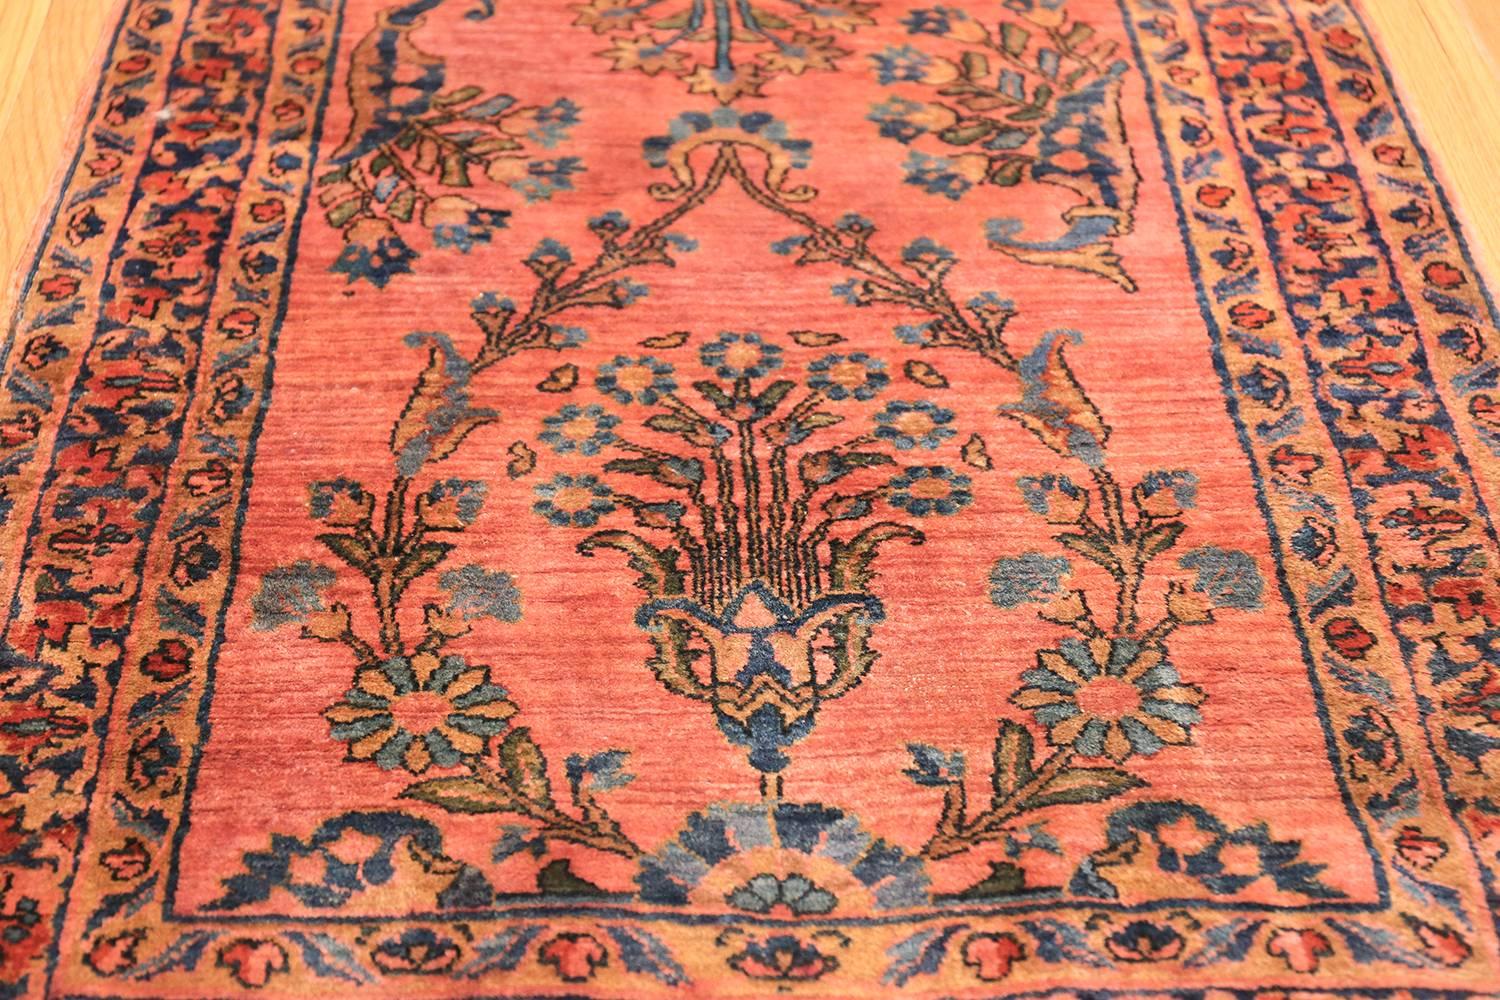 Hand-Knotted Long and Narrow Antique Persian Sarouk Runner Rug